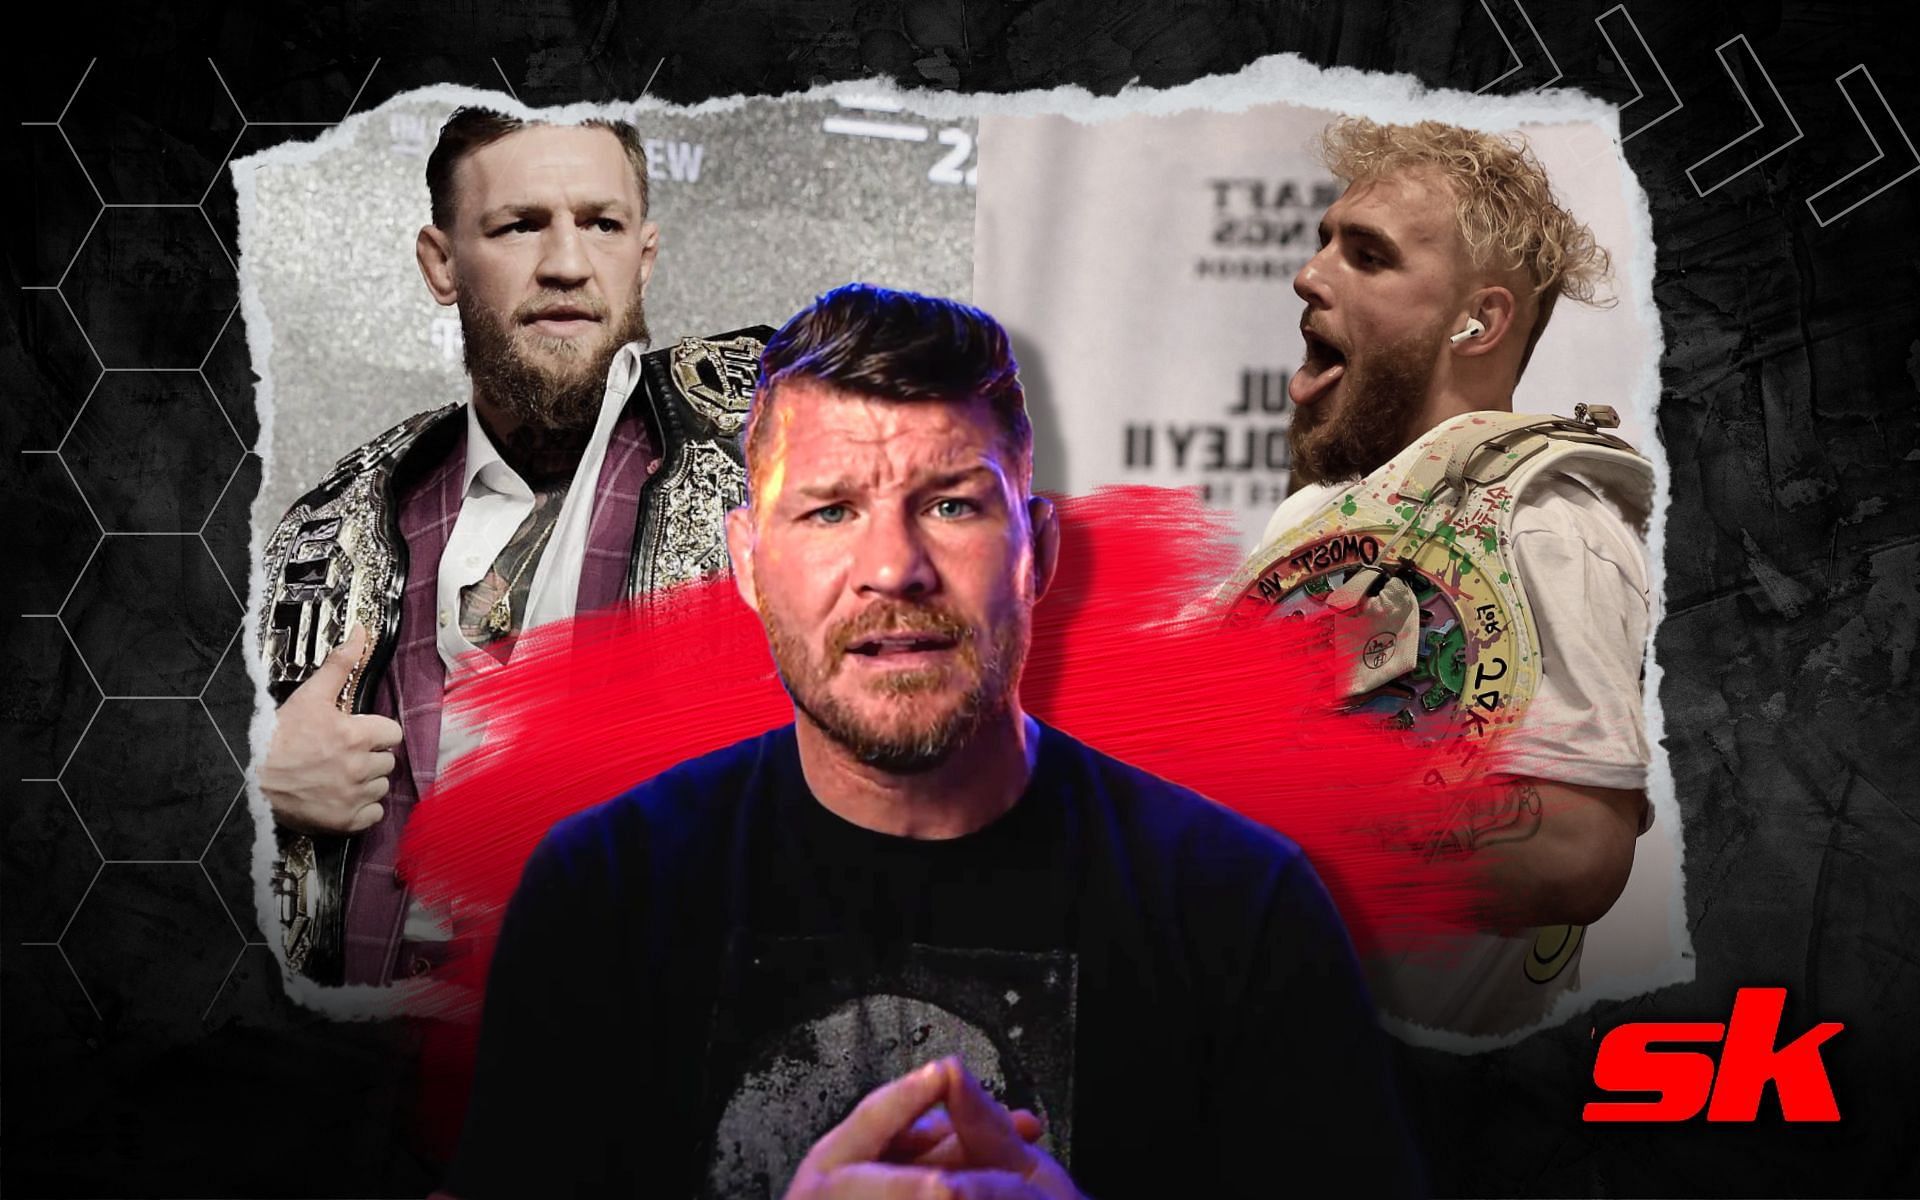 Michael Bisping (front); Conor McGregor (left); Jake Paul (right). [Image credits: Youtube/MichaelBisping]